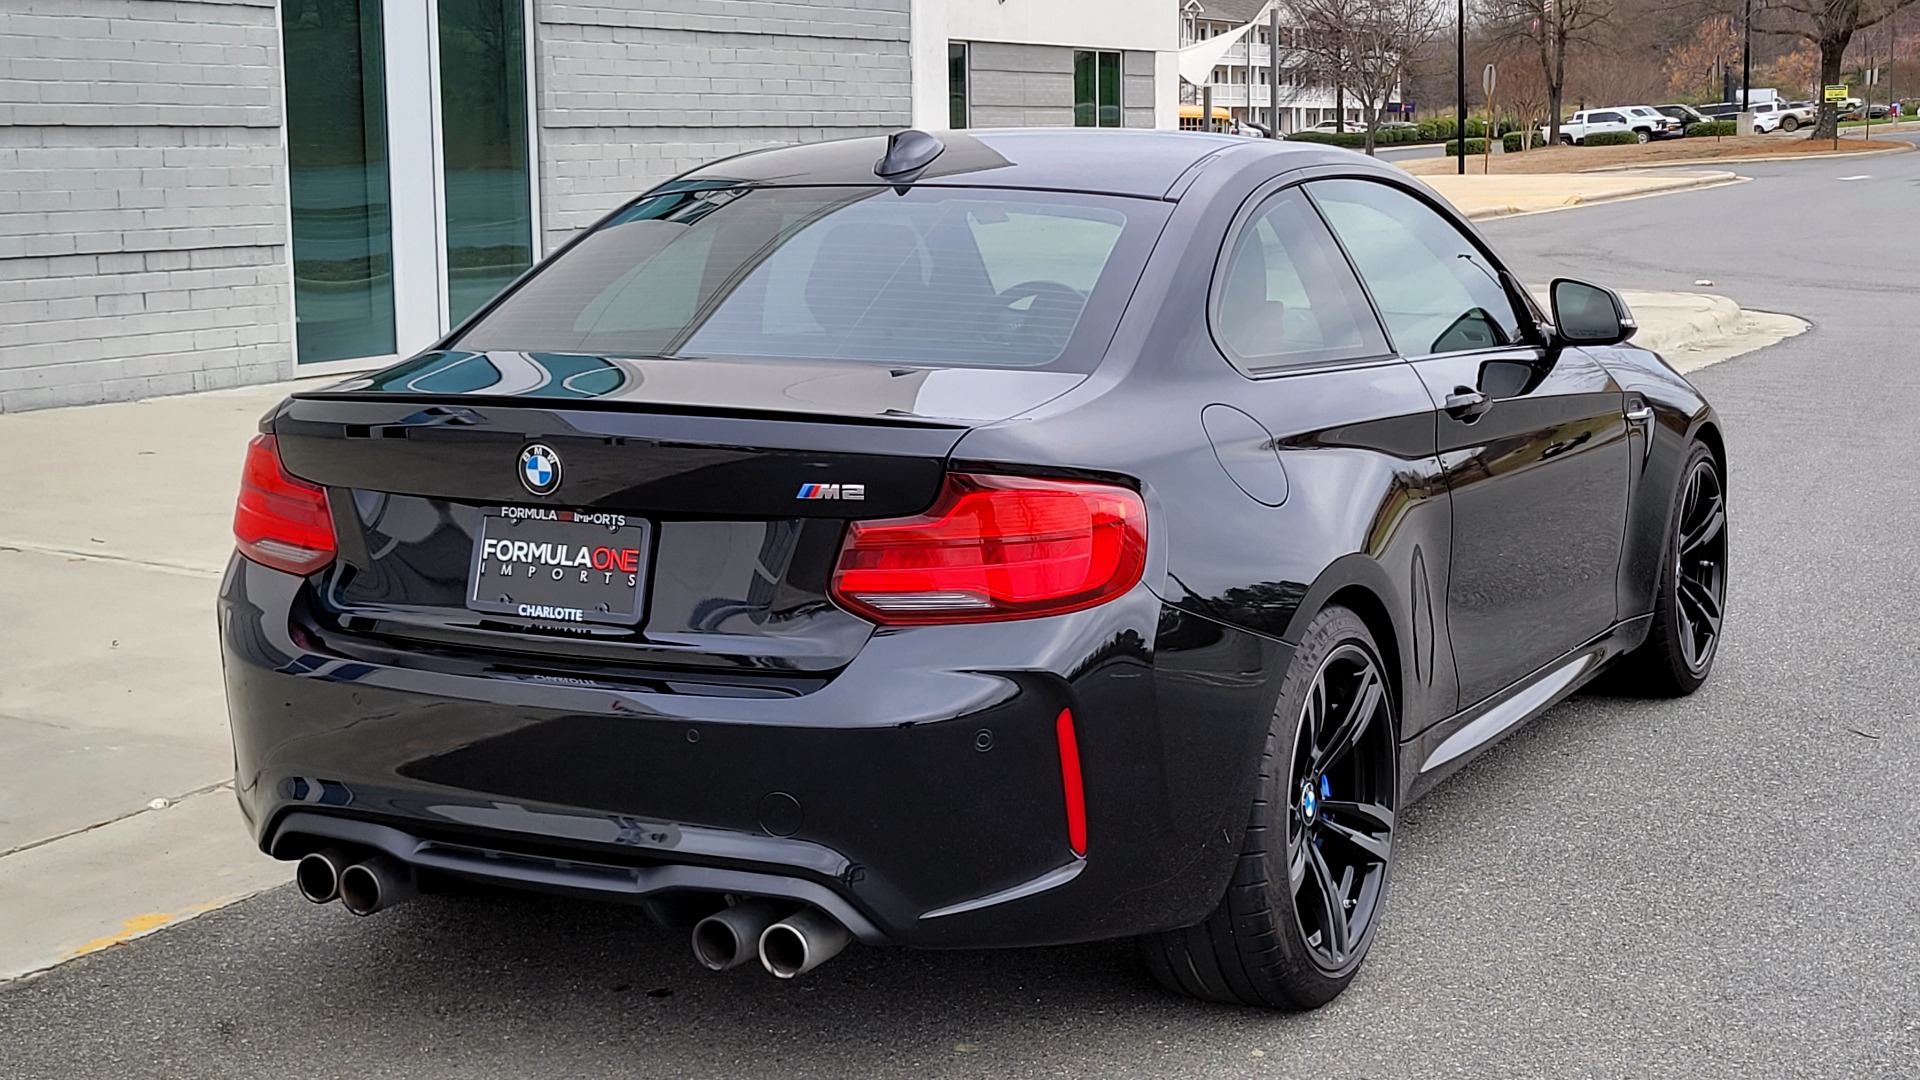 Used 2018 BMW M2 COUPE W/EXECUTIVE PKG / WIFI / H/K SND / PARK ASST / REARVIEW for sale Sold at Formula Imports in Charlotte NC 28227 7